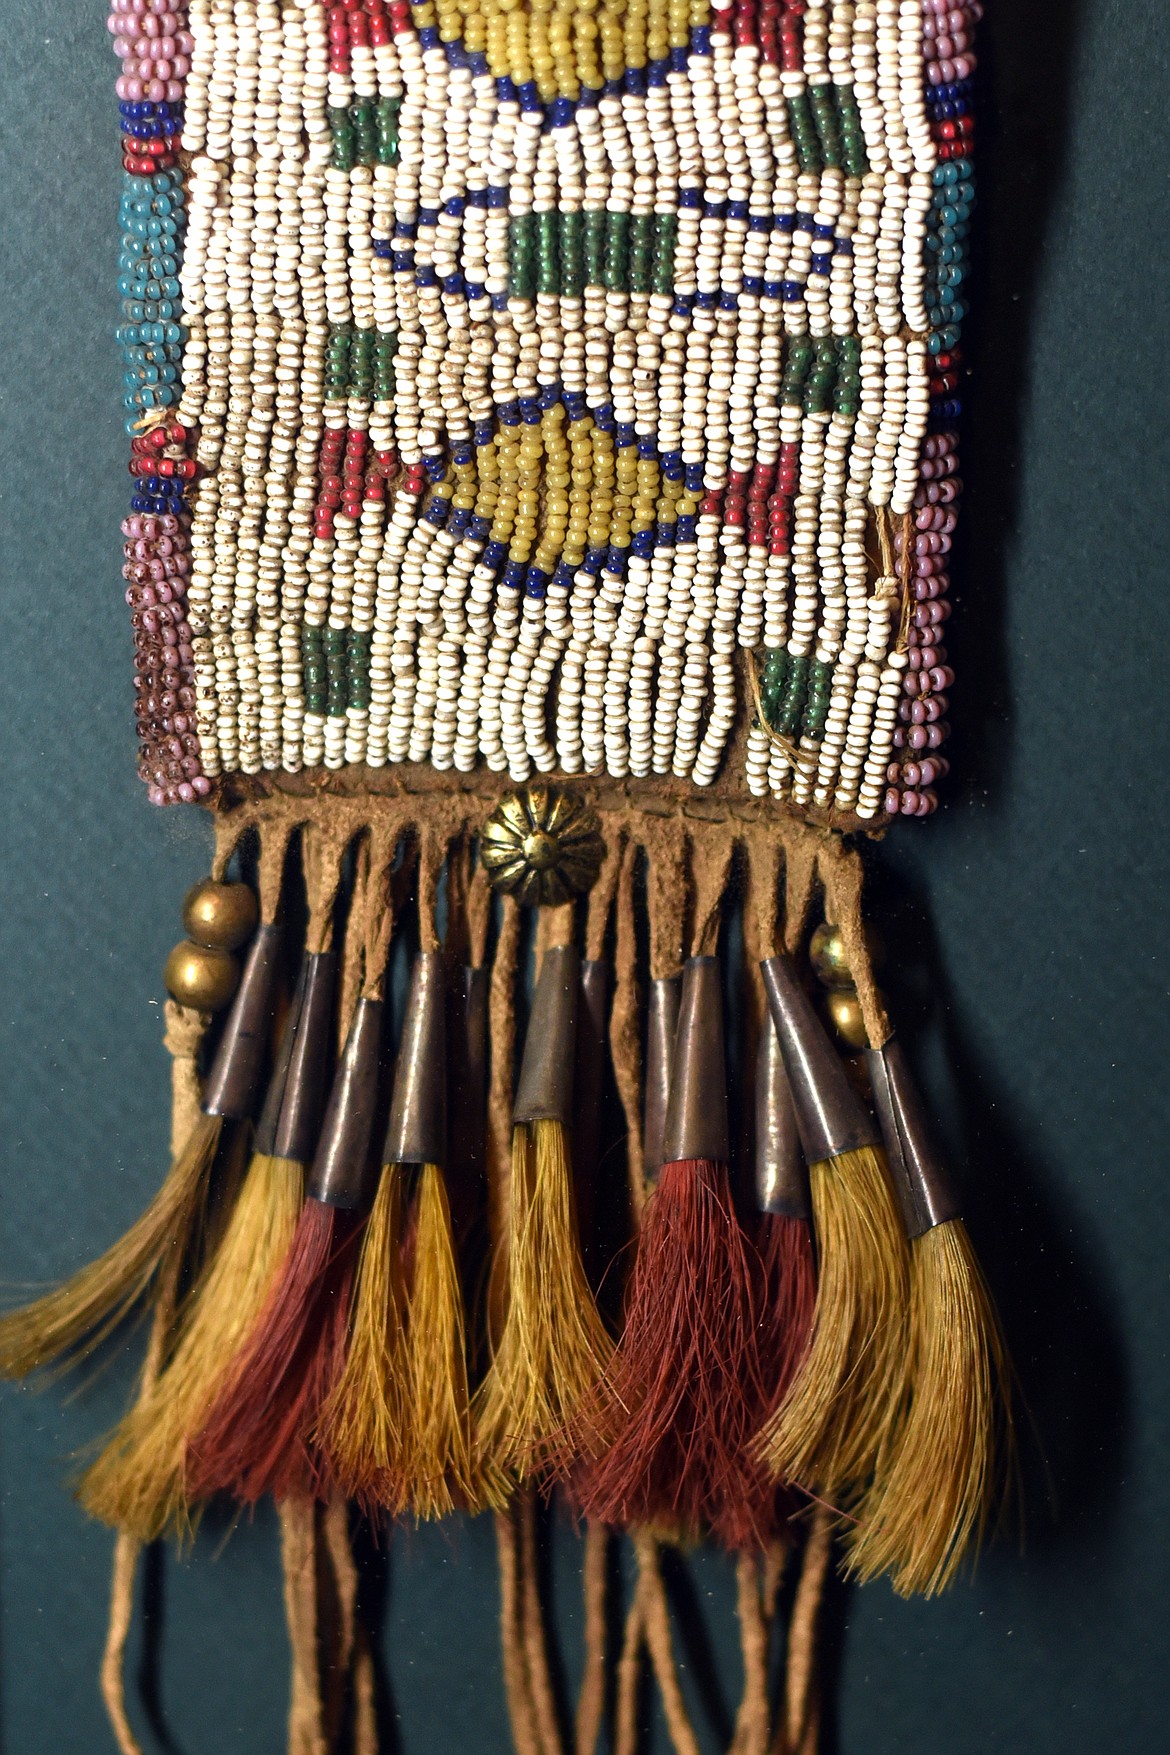 An authentic beaded bag on display under glass at the Bad Rock Settlement Museum.